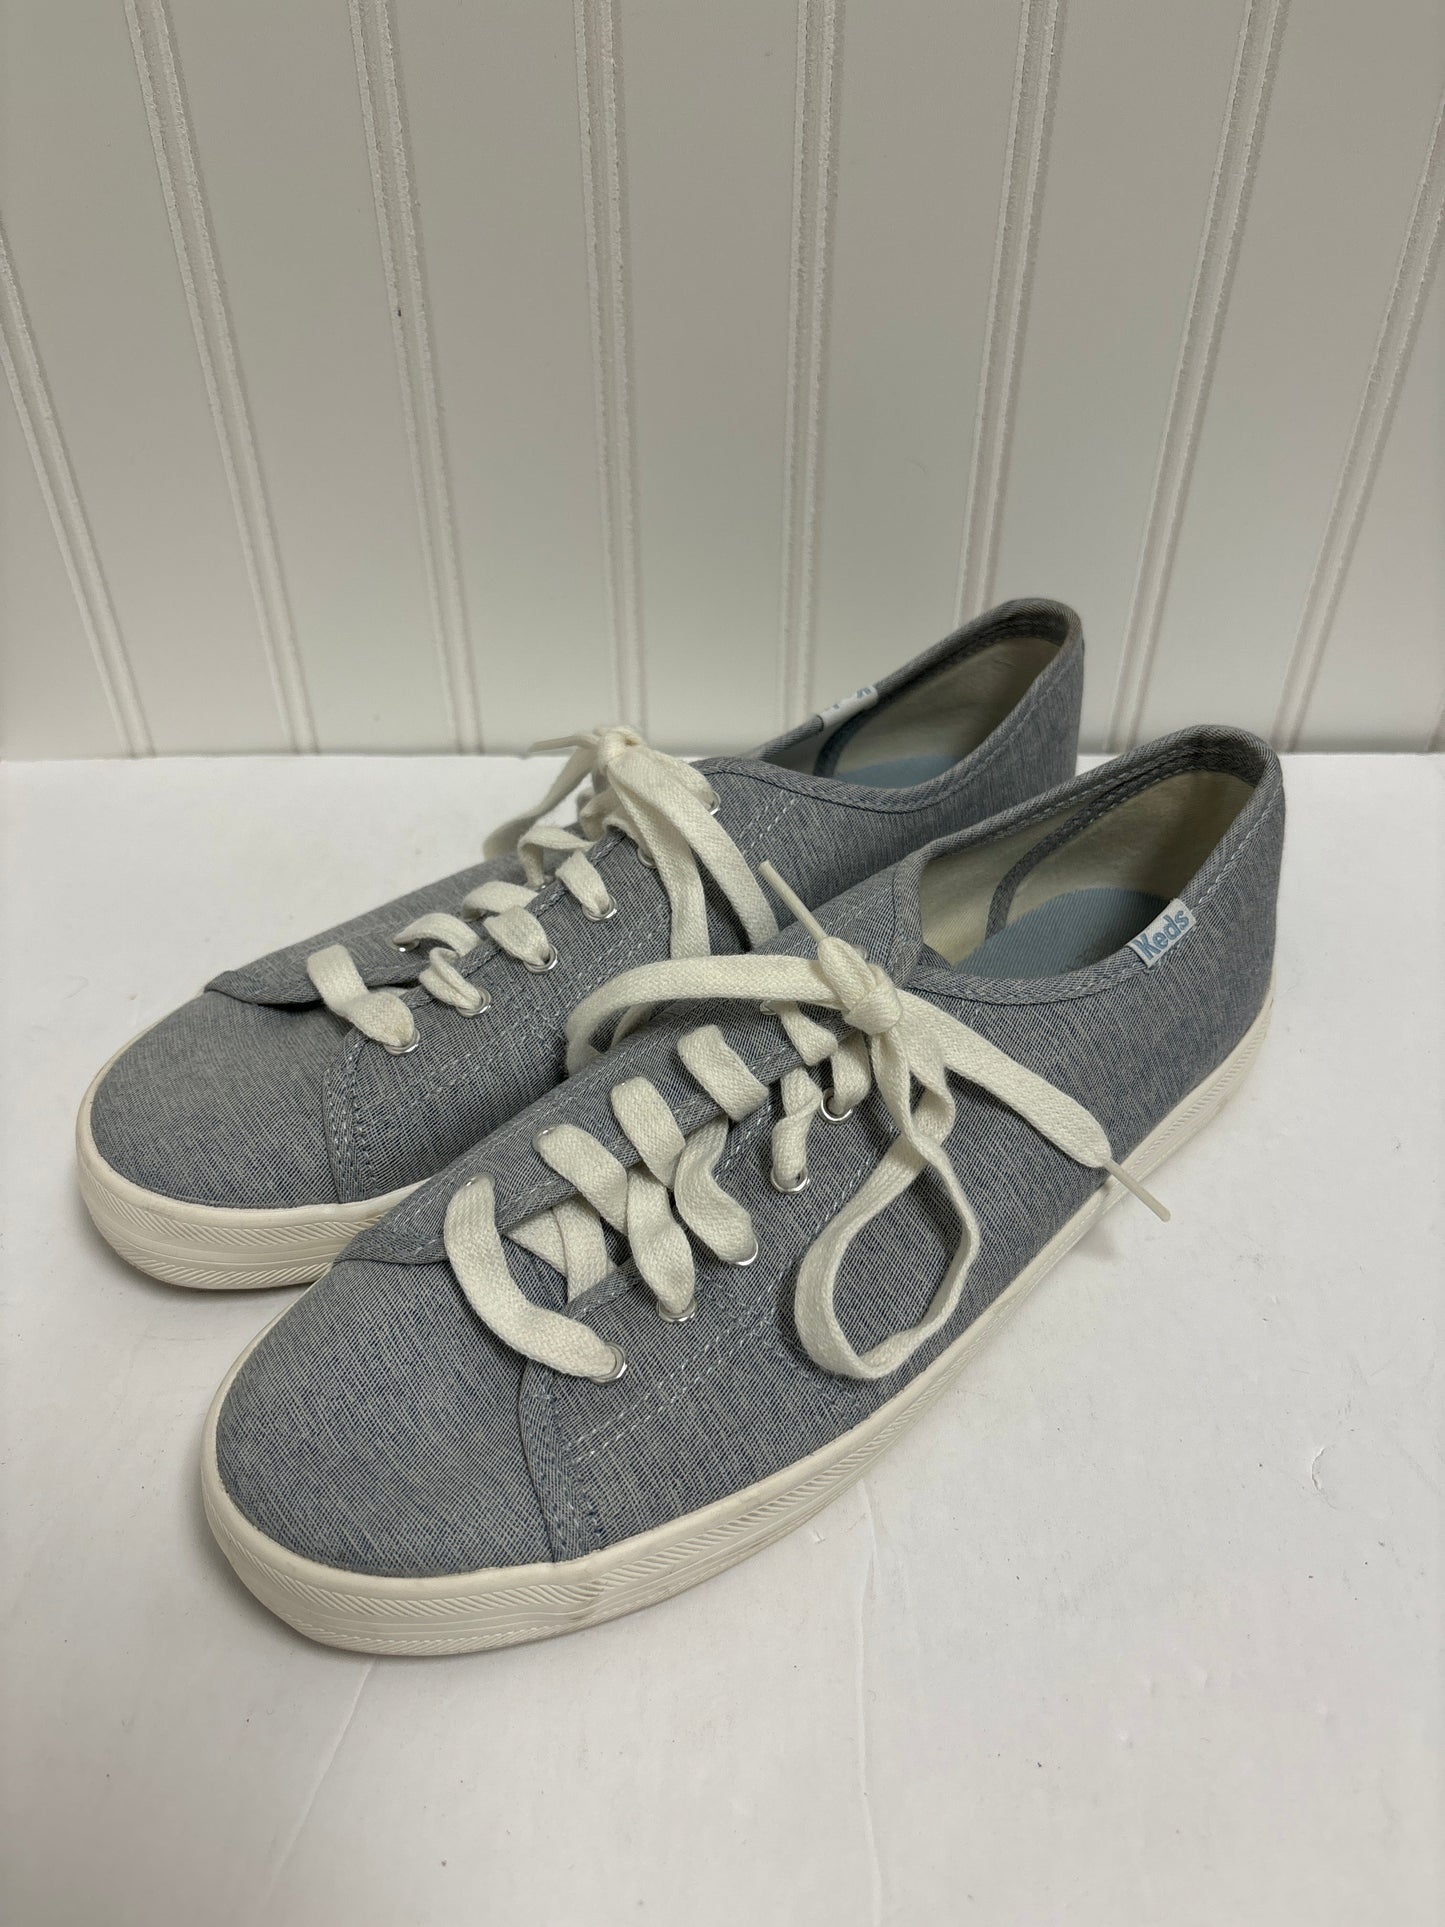 Blue Shoes Sneakers Keds, Size 8.5